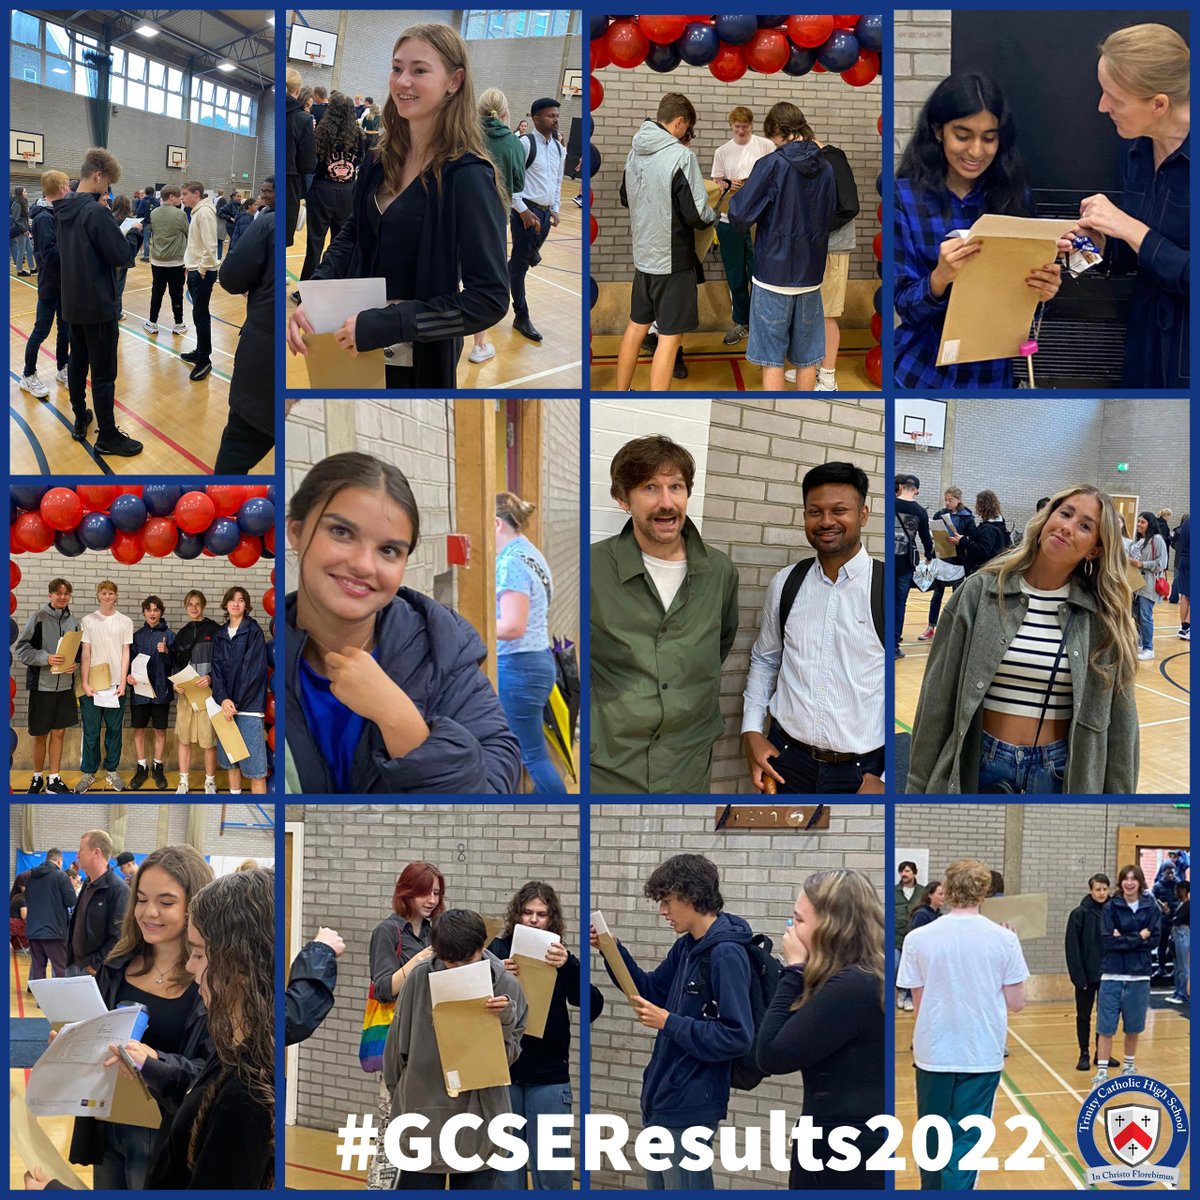 It has been wonderful to see so many happy faces as our pupils collected their #GCSEResults today! We are so proud of you all ⭐️⭐️⭐️⭐️⭐️